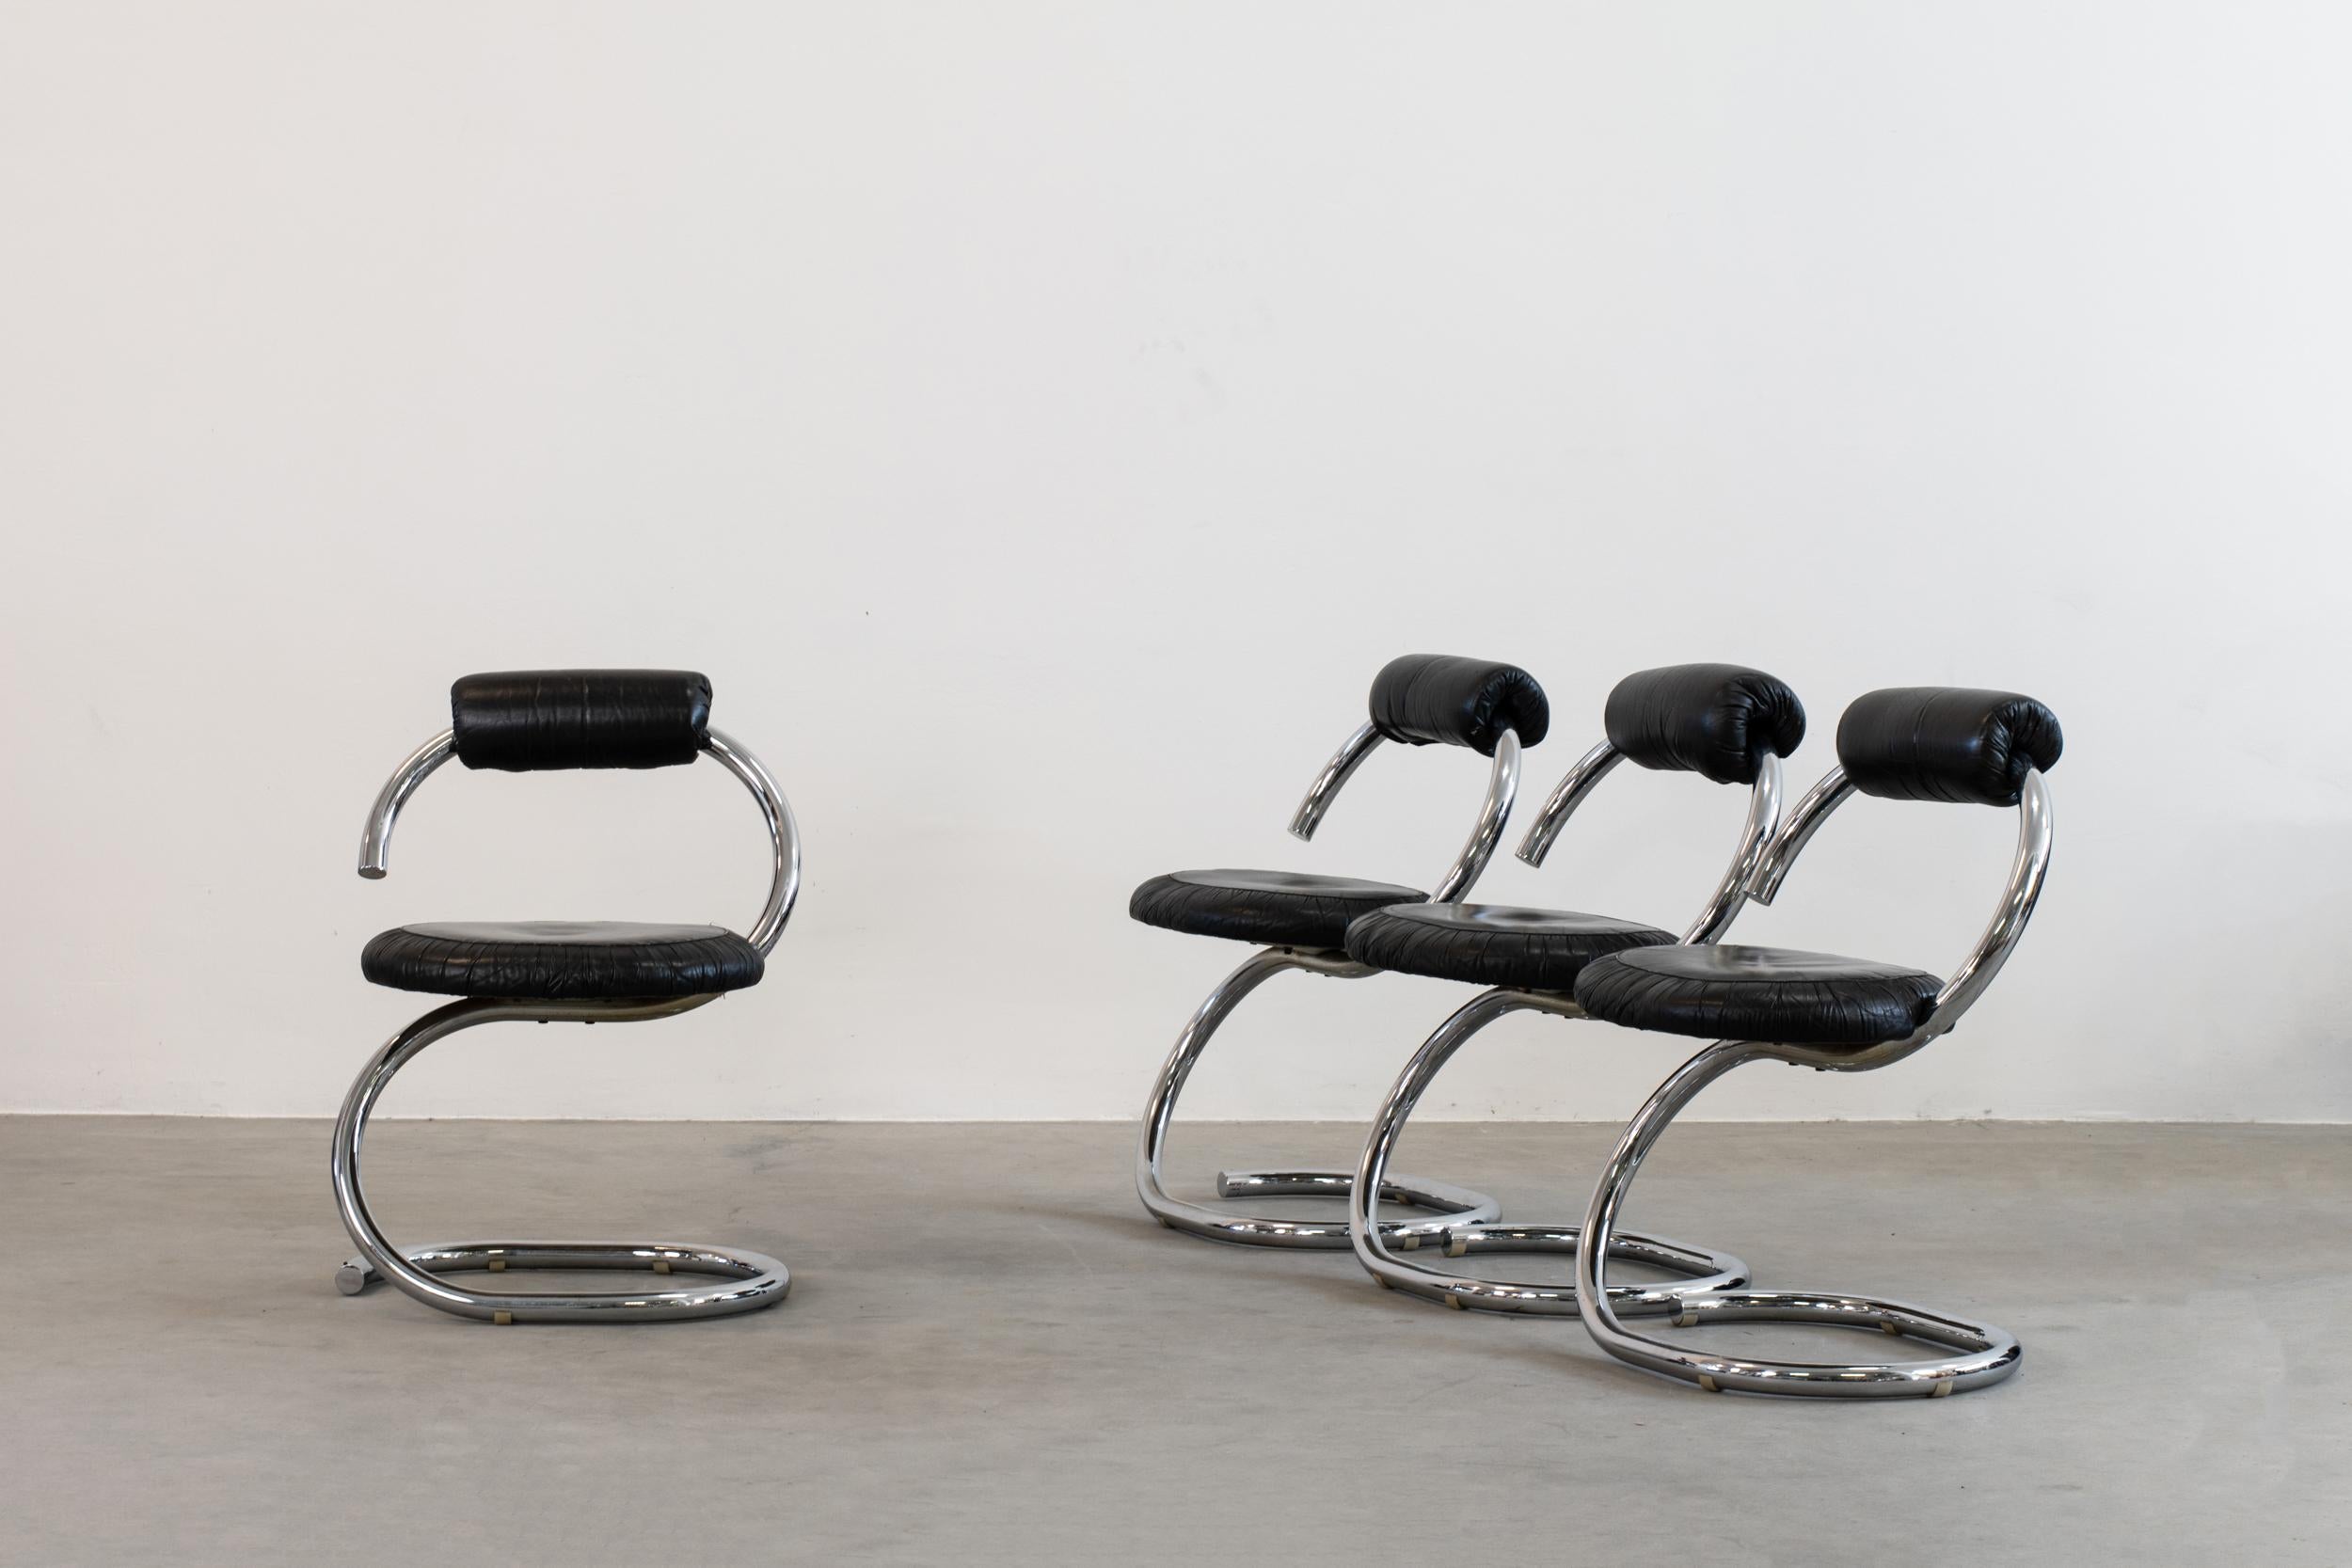 Set of four chairs model Cobra with chromed tubular steel structure and seat in padded faux leather (black), designed by Giotto Stoppino, in the 1970s.

Giotto Stoppino has been one of the architects that inspired the Neoliberty, the architectural